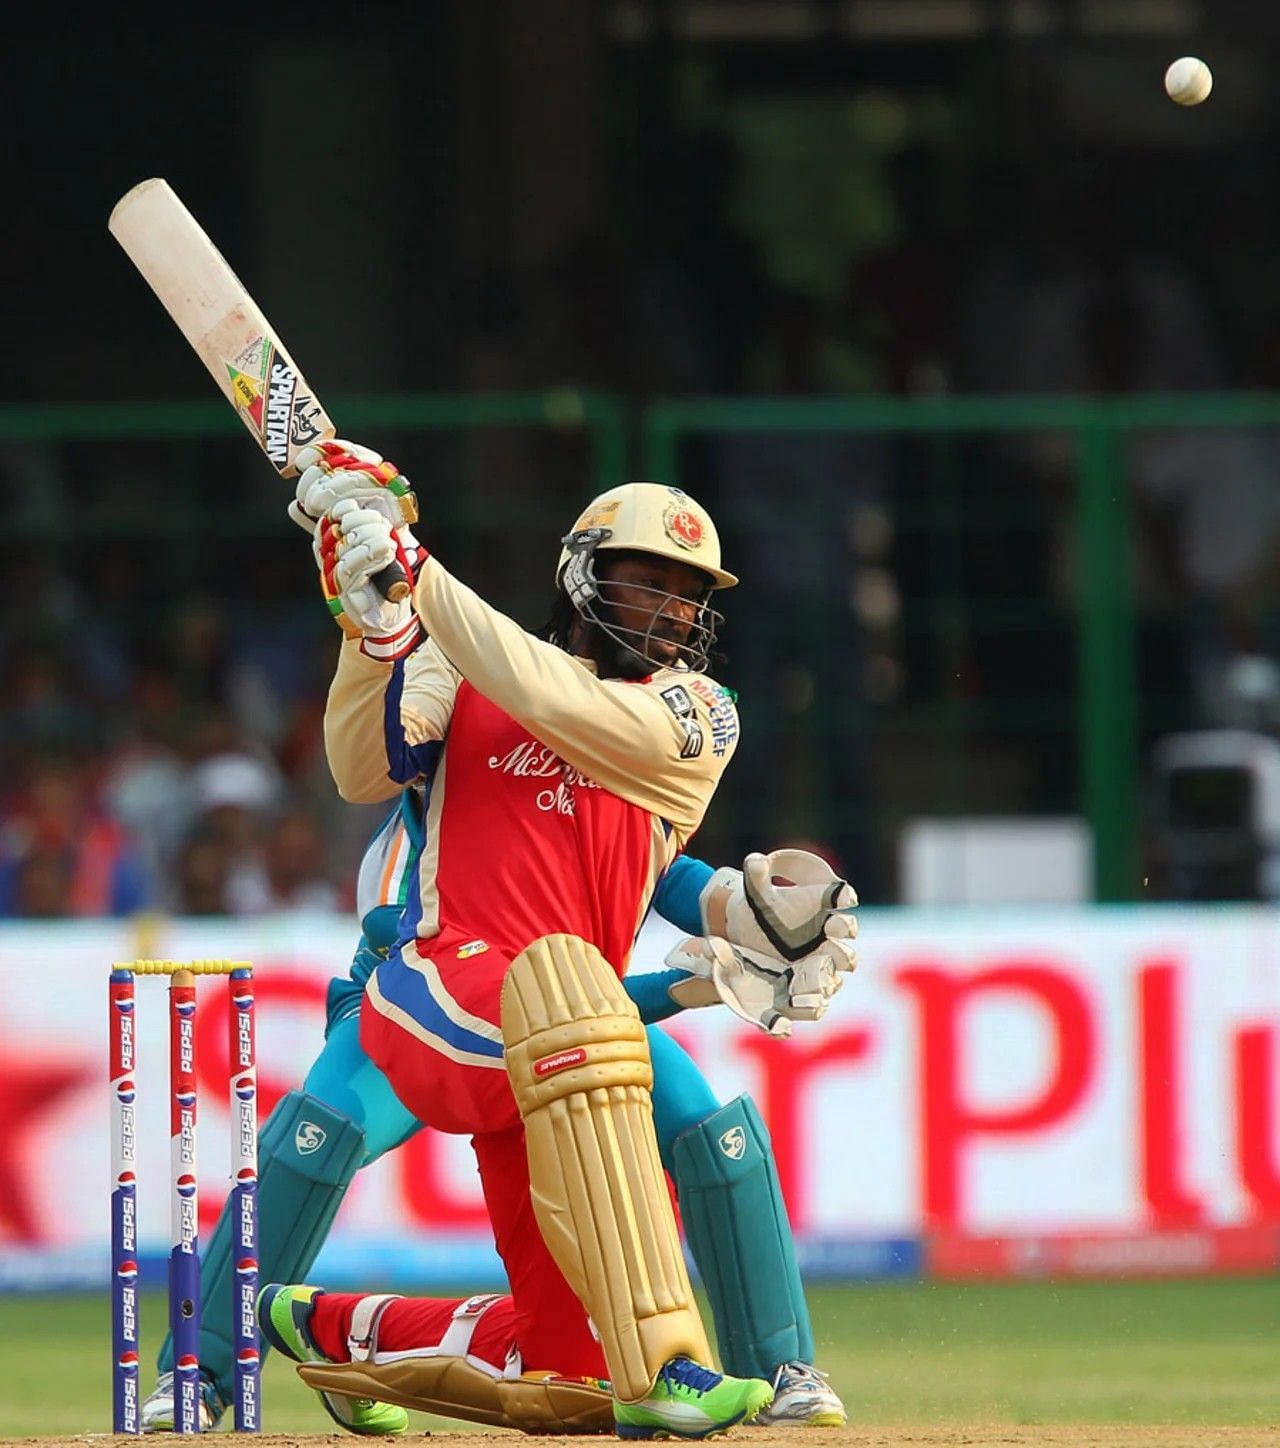 Chris Gayle tumbled countless records during his 175* vs PWI [Getty Images]